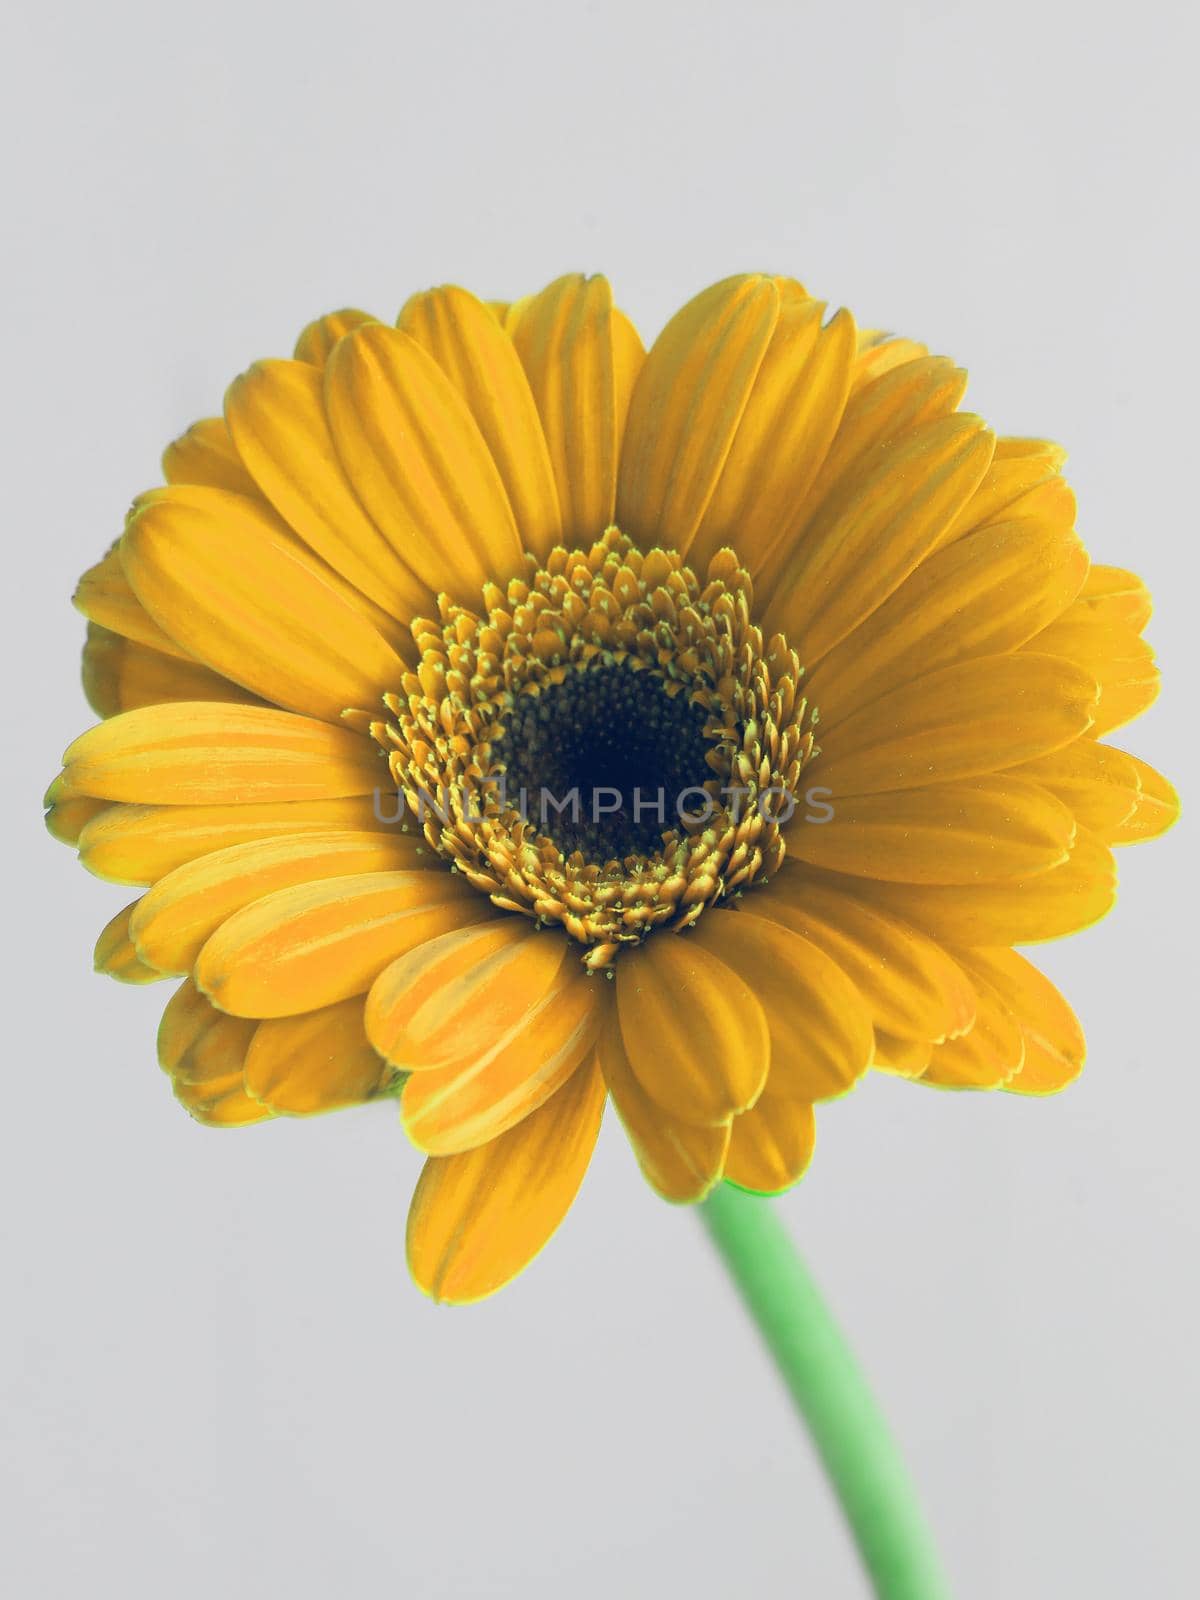 yellow daisy macro petals. beautiful gerbera flower on white background. spring concept